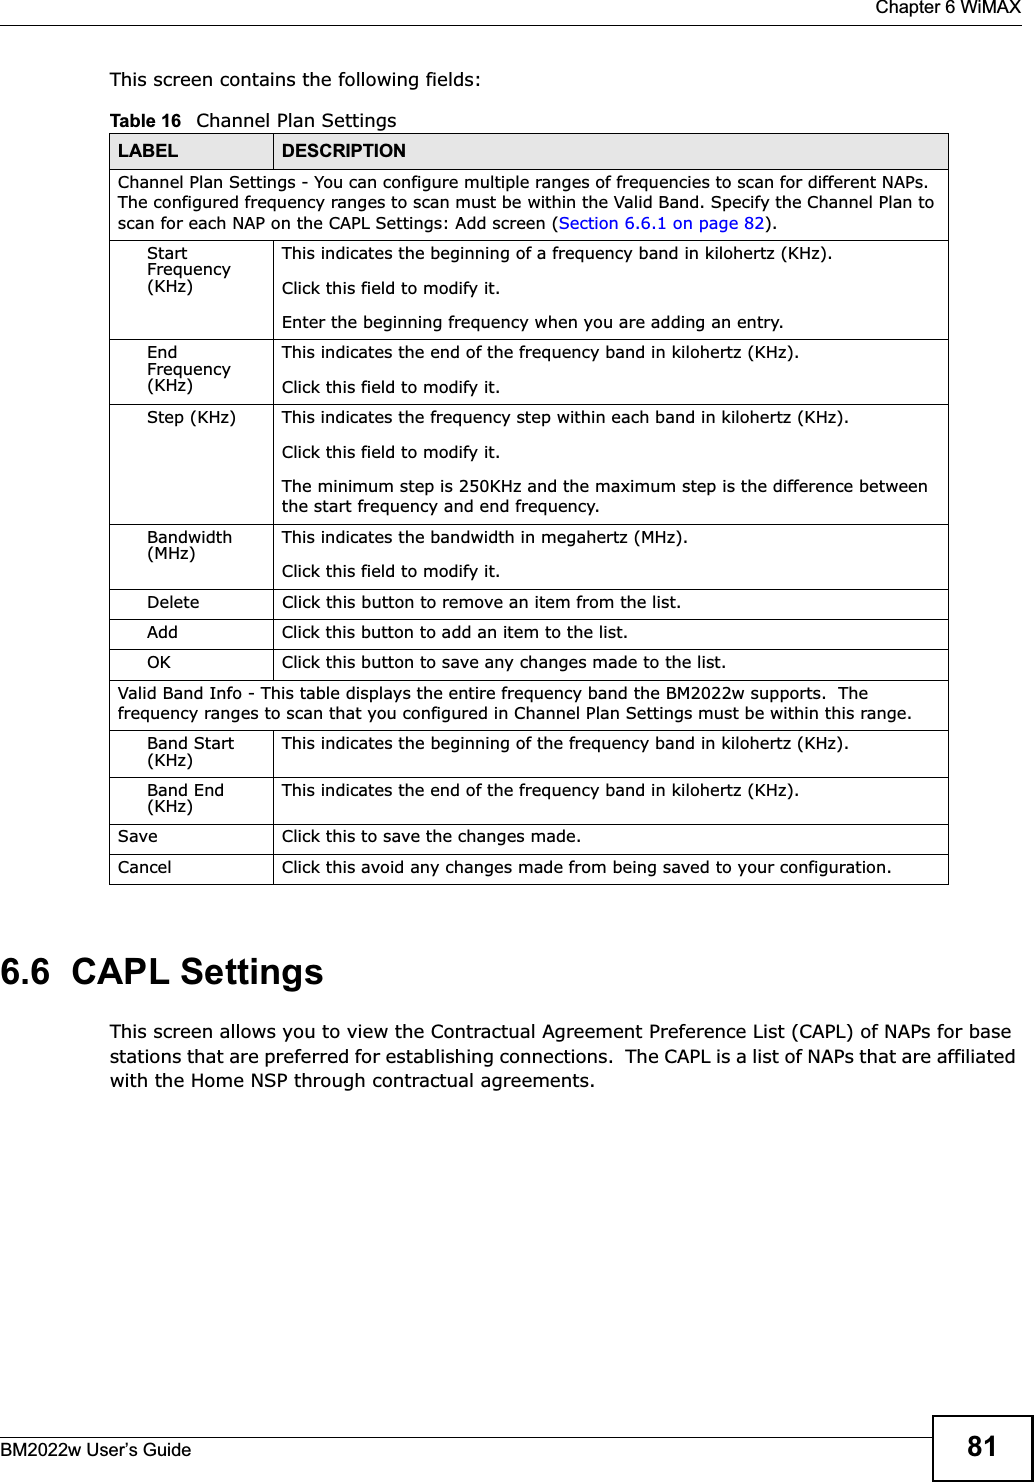  Chapter 6 WiMAXBM2022w User’s Guide 81This screen contains the following fields:6.6  CAPL SettingsThis screen allows you to view the Contractual Agreement Preference List (CAPL) of NAPs for base stations that are preferred for establishing connections.  The CAPL is a list of NAPs that are affiliated with the Home NSP through contractual agreements.Table 16   Channel Plan SettingsLABEL DESCRIPTIONChannel Plan Settings - You can configure multiple ranges of frequencies to scan for different NAPs.  The configured frequency ranges to scan must be within the Valid Band. Specify the Channel Plan to scan for each NAP on the CAPL Settings: Add screen (Section 6.6.1 on page 82).StartFrequency (KHz)This indicates the beginning of a frequency band in kilohertz (KHz).Click this field to modify it.Enter the beginning frequency when you are adding an entry.EndFrequency (KHz)This indicates the end of the frequency band in kilohertz (KHz).Click this field to modify it.Step (KHz) This indicates the frequency step within each band in kilohertz (KHz).Click this field to modify it.The minimum step is 250KHz and the maximum step is the difference between the start frequency and end frequency.Bandwidth (MHz) This indicates the bandwidth in megahertz (MHz).Click this field to modify it.Delete Click this button to remove an item from the list.Add Click this button to add an item to the list.OK Click this button to save any changes made to the list.Valid Band Info - This table displays the entire frequency band the BM2022w supports.  The frequency ranges to scan that you configured in Channel Plan Settings must be within this range.Band Start (KHz) This indicates the beginning of the frequency band in kilohertz (KHz).Band End (KHz) This indicates the end of the frequency band in kilohertz (KHz).Save Click this to save the changes made.Cancel Click this avoid any changes made from being saved to your configuration.